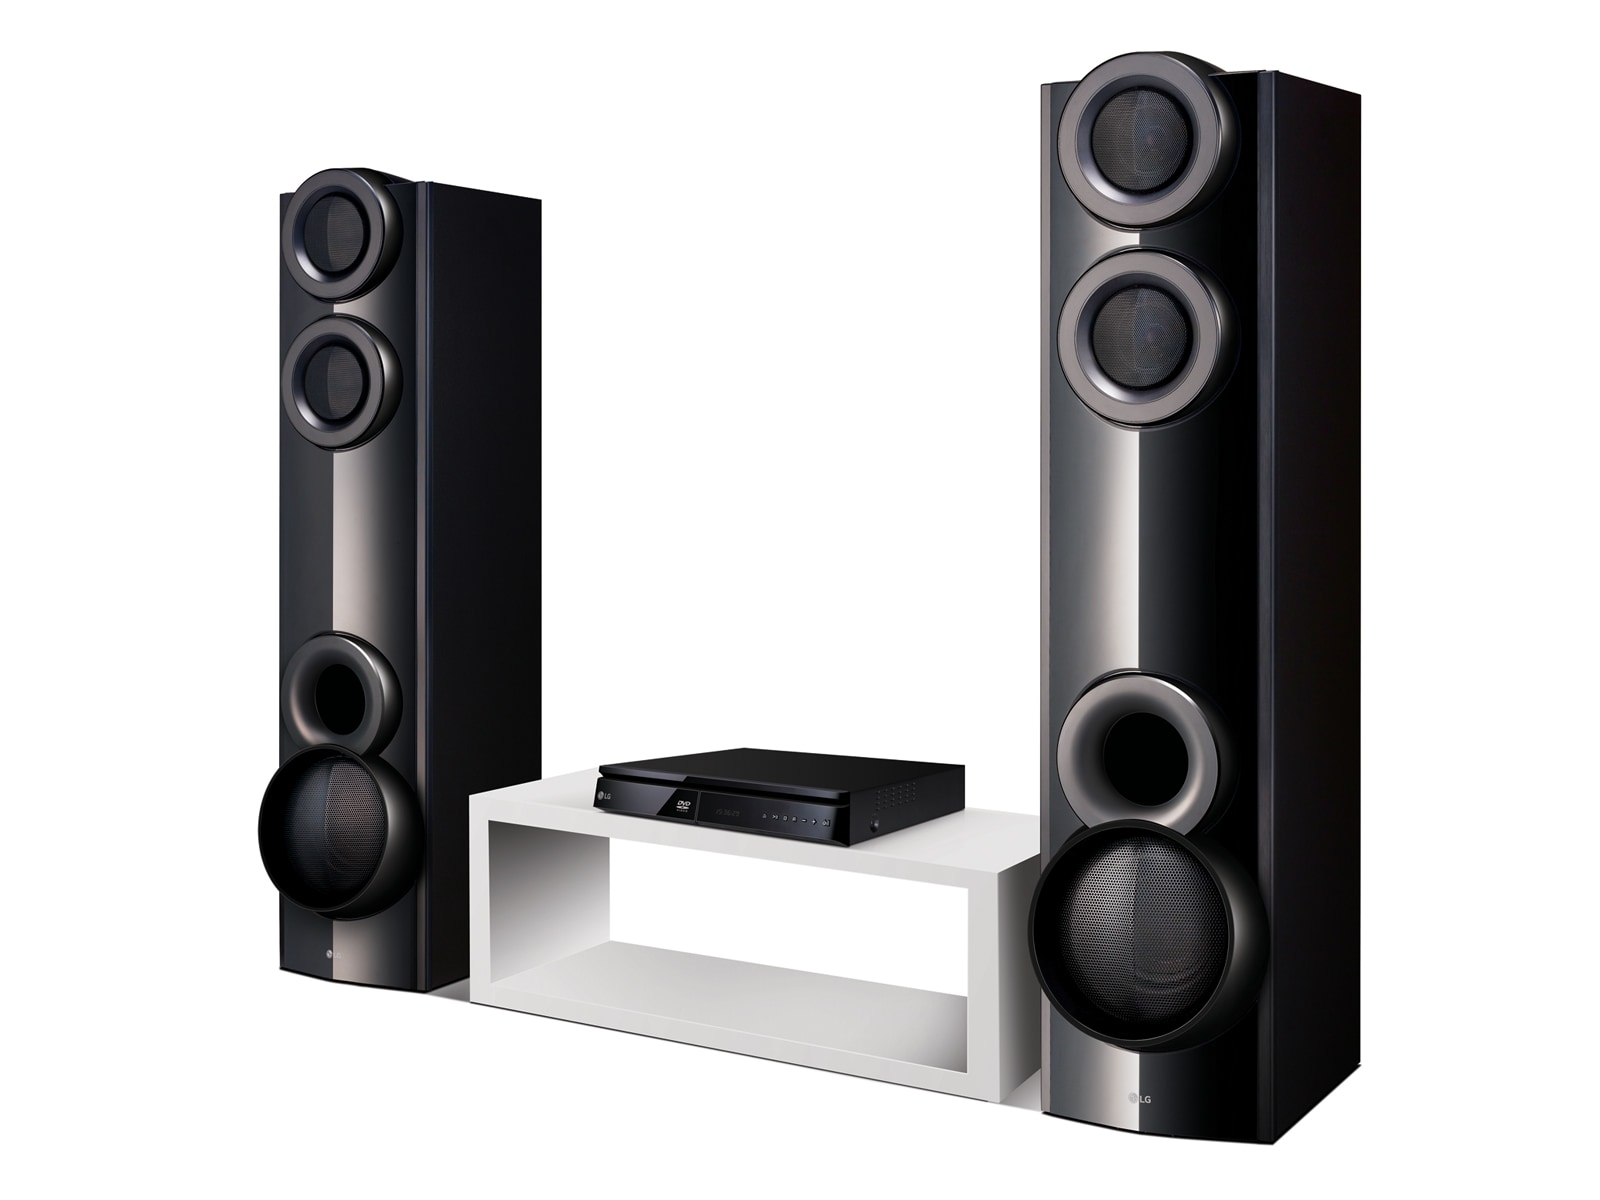 LG LHD675 4.2 CH. DVD HOME THEATER SYSTEM, LHD675